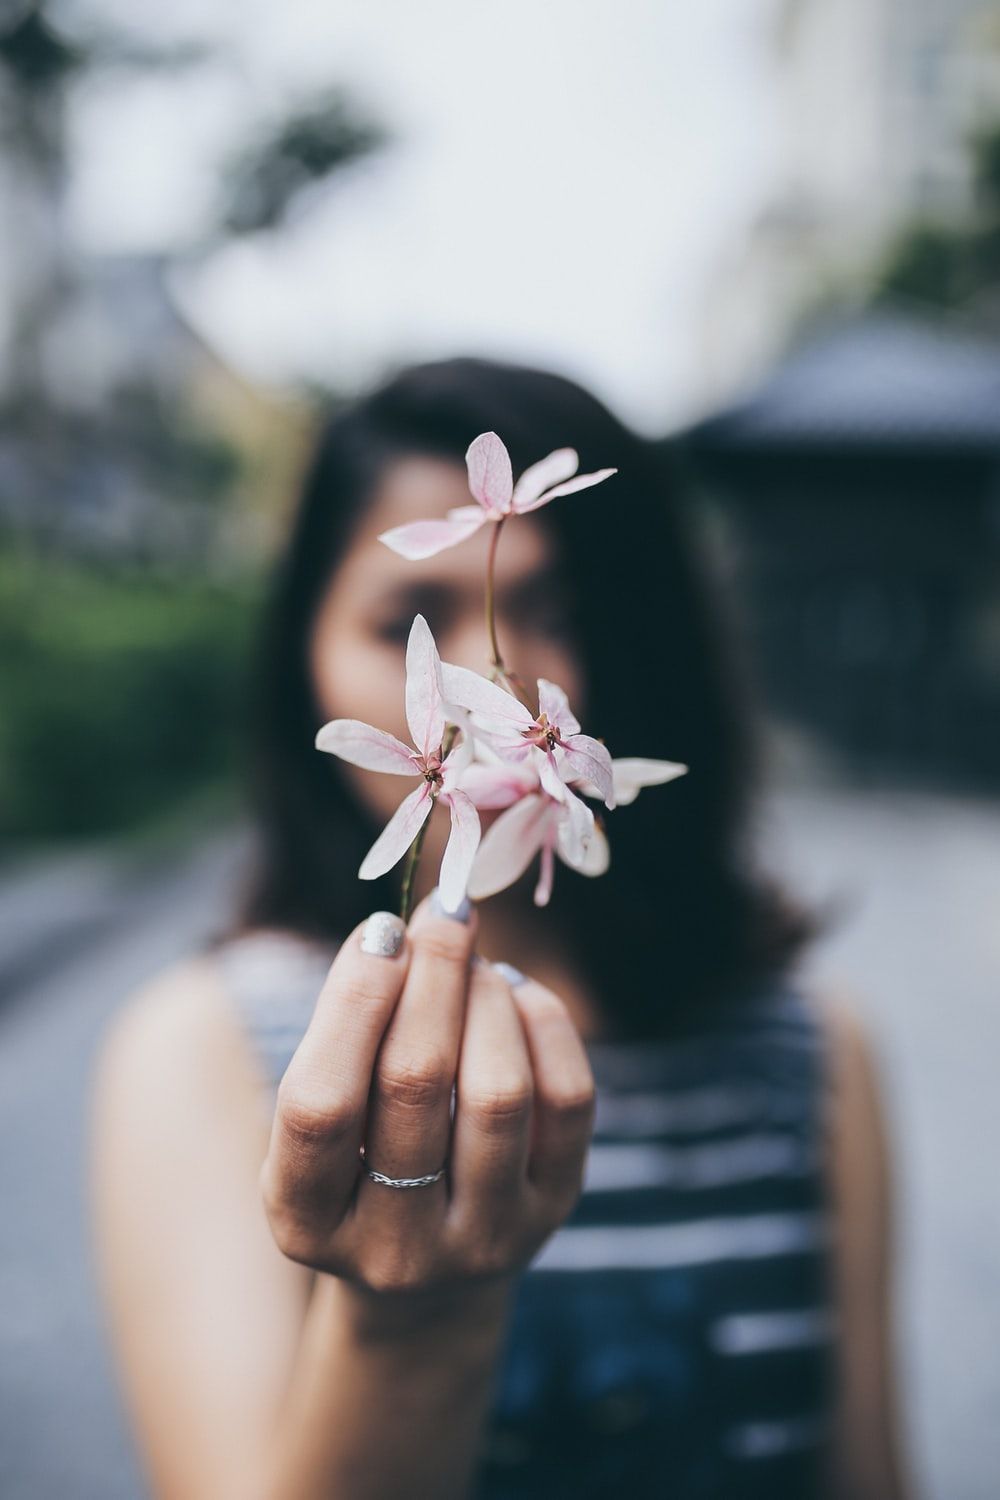 Woman Holding Flower Picture. Download Free Image